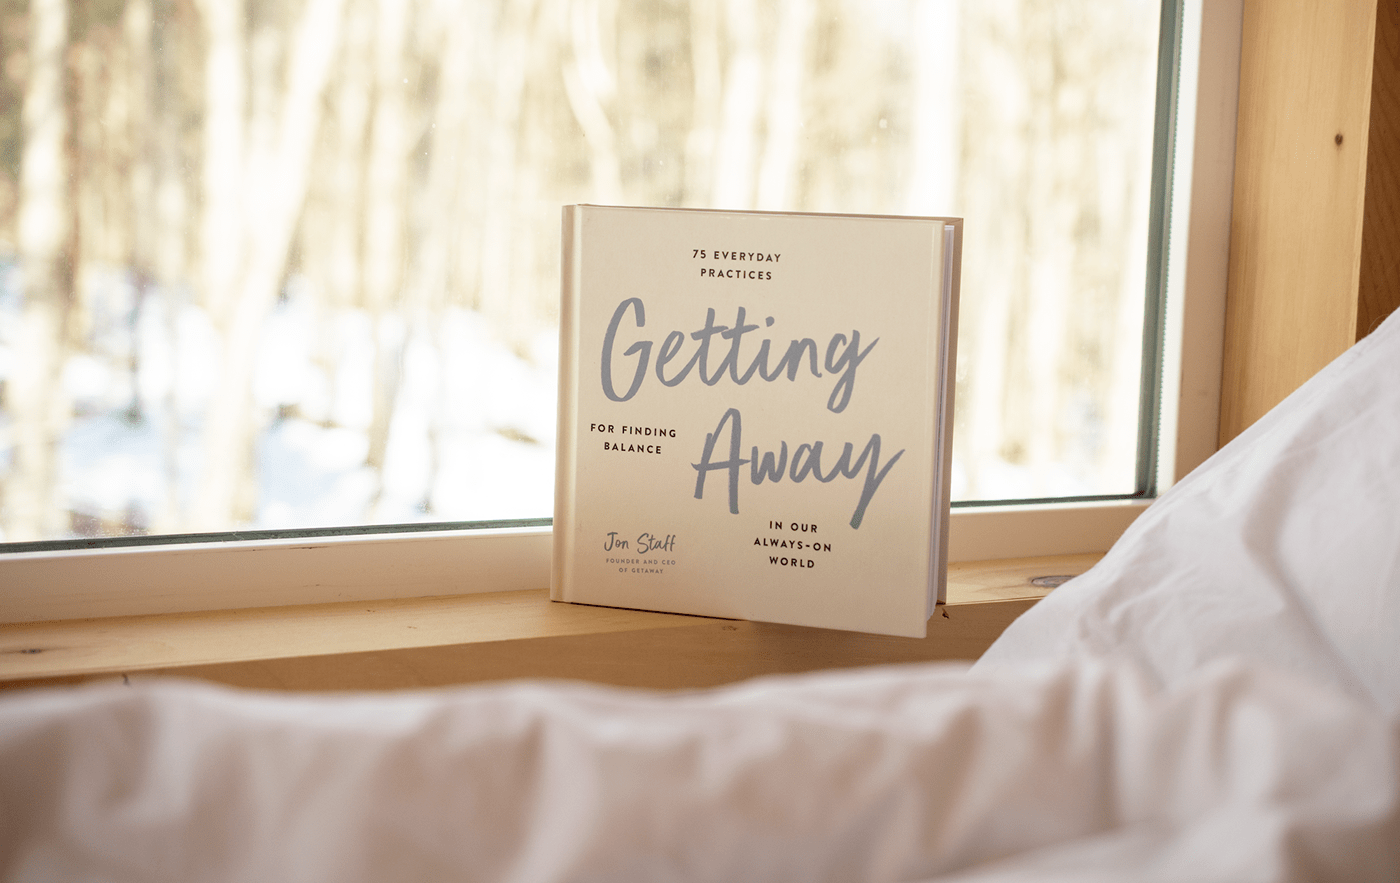 Photo of the Getting Away book sitting on the window sill of a Getaway cabin (in the winter). 